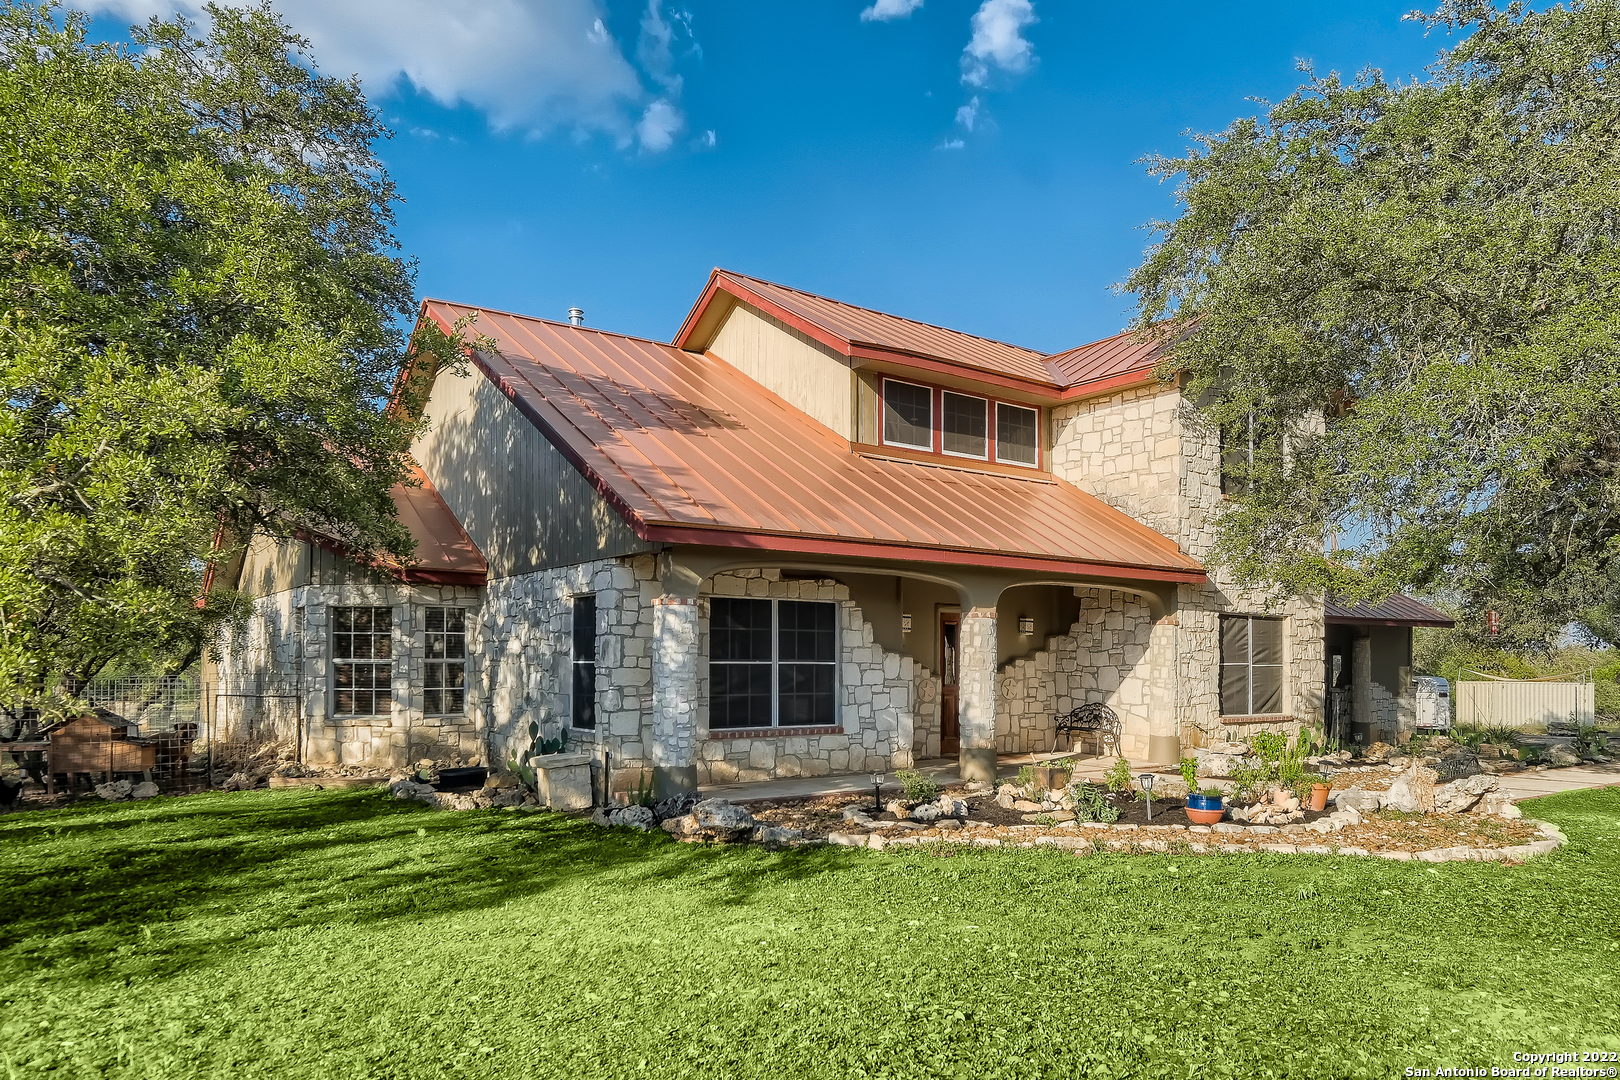 Come live your best life in Spring Branch on this unique 5-acre gated farm property conveniently tucked off Hwy 281 with no known restrictions, no city taxes, and no HOA!  Custom home built in 1993 with 4 bedrooms and 2.5 baths. The character and charm include masonry accented walls, farmhouse kitchen, hardwood floors, rustic finishes including a wood-burning fireplace, metal, and wood ceiling in the living area, and antique Spanish style Mission Shudder doors that open to the scenic views and back pasture.    Downstairs you'll find the spacious primary bedroom suite with two closets and two vanities. Enjoy picturesque views overlooking the organic Victory garden, fire pit, and horse pasture while soaking in your large tub. Currently, an executive home office could serve as a second bedroom. The kitchen, dining room, and living area are spacious and open into a vaulted ceiling. Upstairs are two additional bedrooms with a full bathroom. Watch Texas sunsets and falling stars next to the large firepit in the yard that overlooks beautiful views of surrounding Hill Country.     Upgrades completed in the past two years include a fully enclosed 7 ft deer fence with 3 strands of top wire for the entire property, new standing seam metal roof, GVTC High-Speed internet, Bosch dishwasher, masonry work, electrical upgrades for light fixtures, in-air duct UV light purification system for HVAC, new fireplace with chimney, driveway completed with new stonework and fully landscaped.    This farmette offers a variety of fruit trees including 3 persimmons, 4 figs, 4 peaches, a plum, lemon, and key lime, all planted by the current owner. The owner is a member of the American Rose Society and has over a dozen drought and disease-tolerant varieties of roses including David Austin roses.     Looking for a spot for all creatures great and small? Bring your horses to enjoy a George Strait sand riding arena, separate metal fenced stud area, plus there is plenty of room for dogs, chickens, goats, a pool, a barn, and whatever your desires might be.